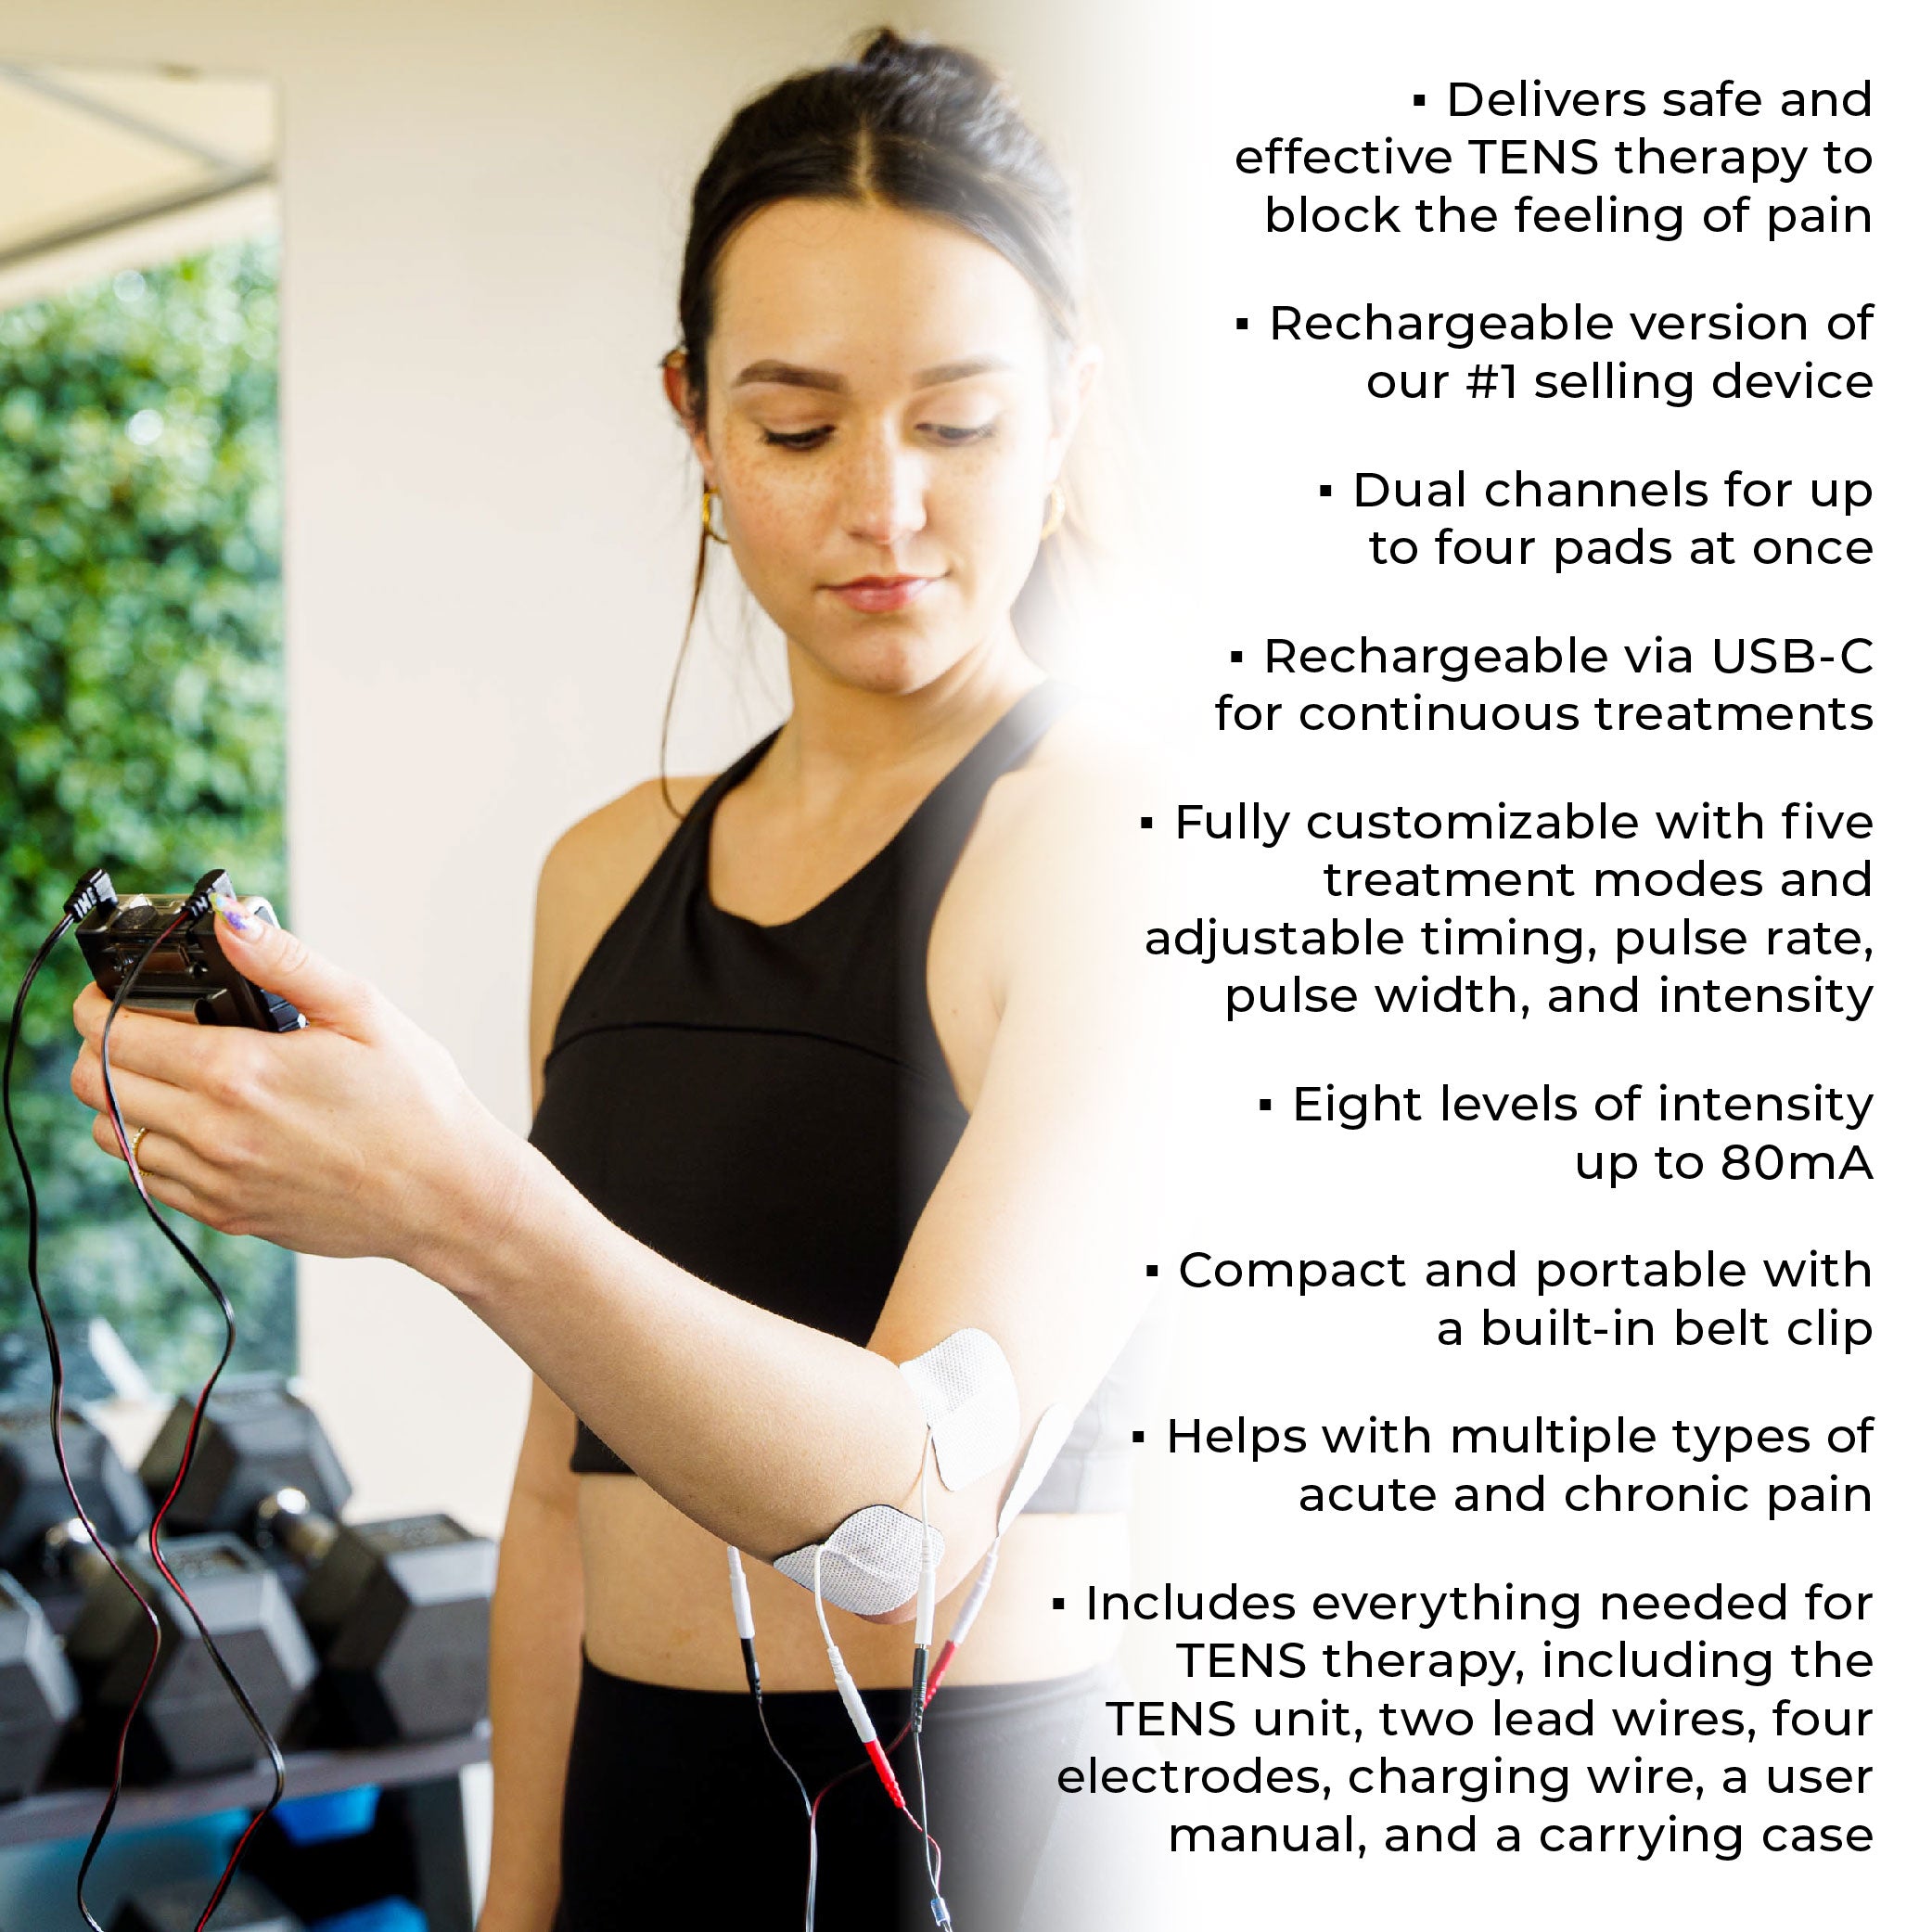 A woman holding a TENS unit with product descriptions from the product page